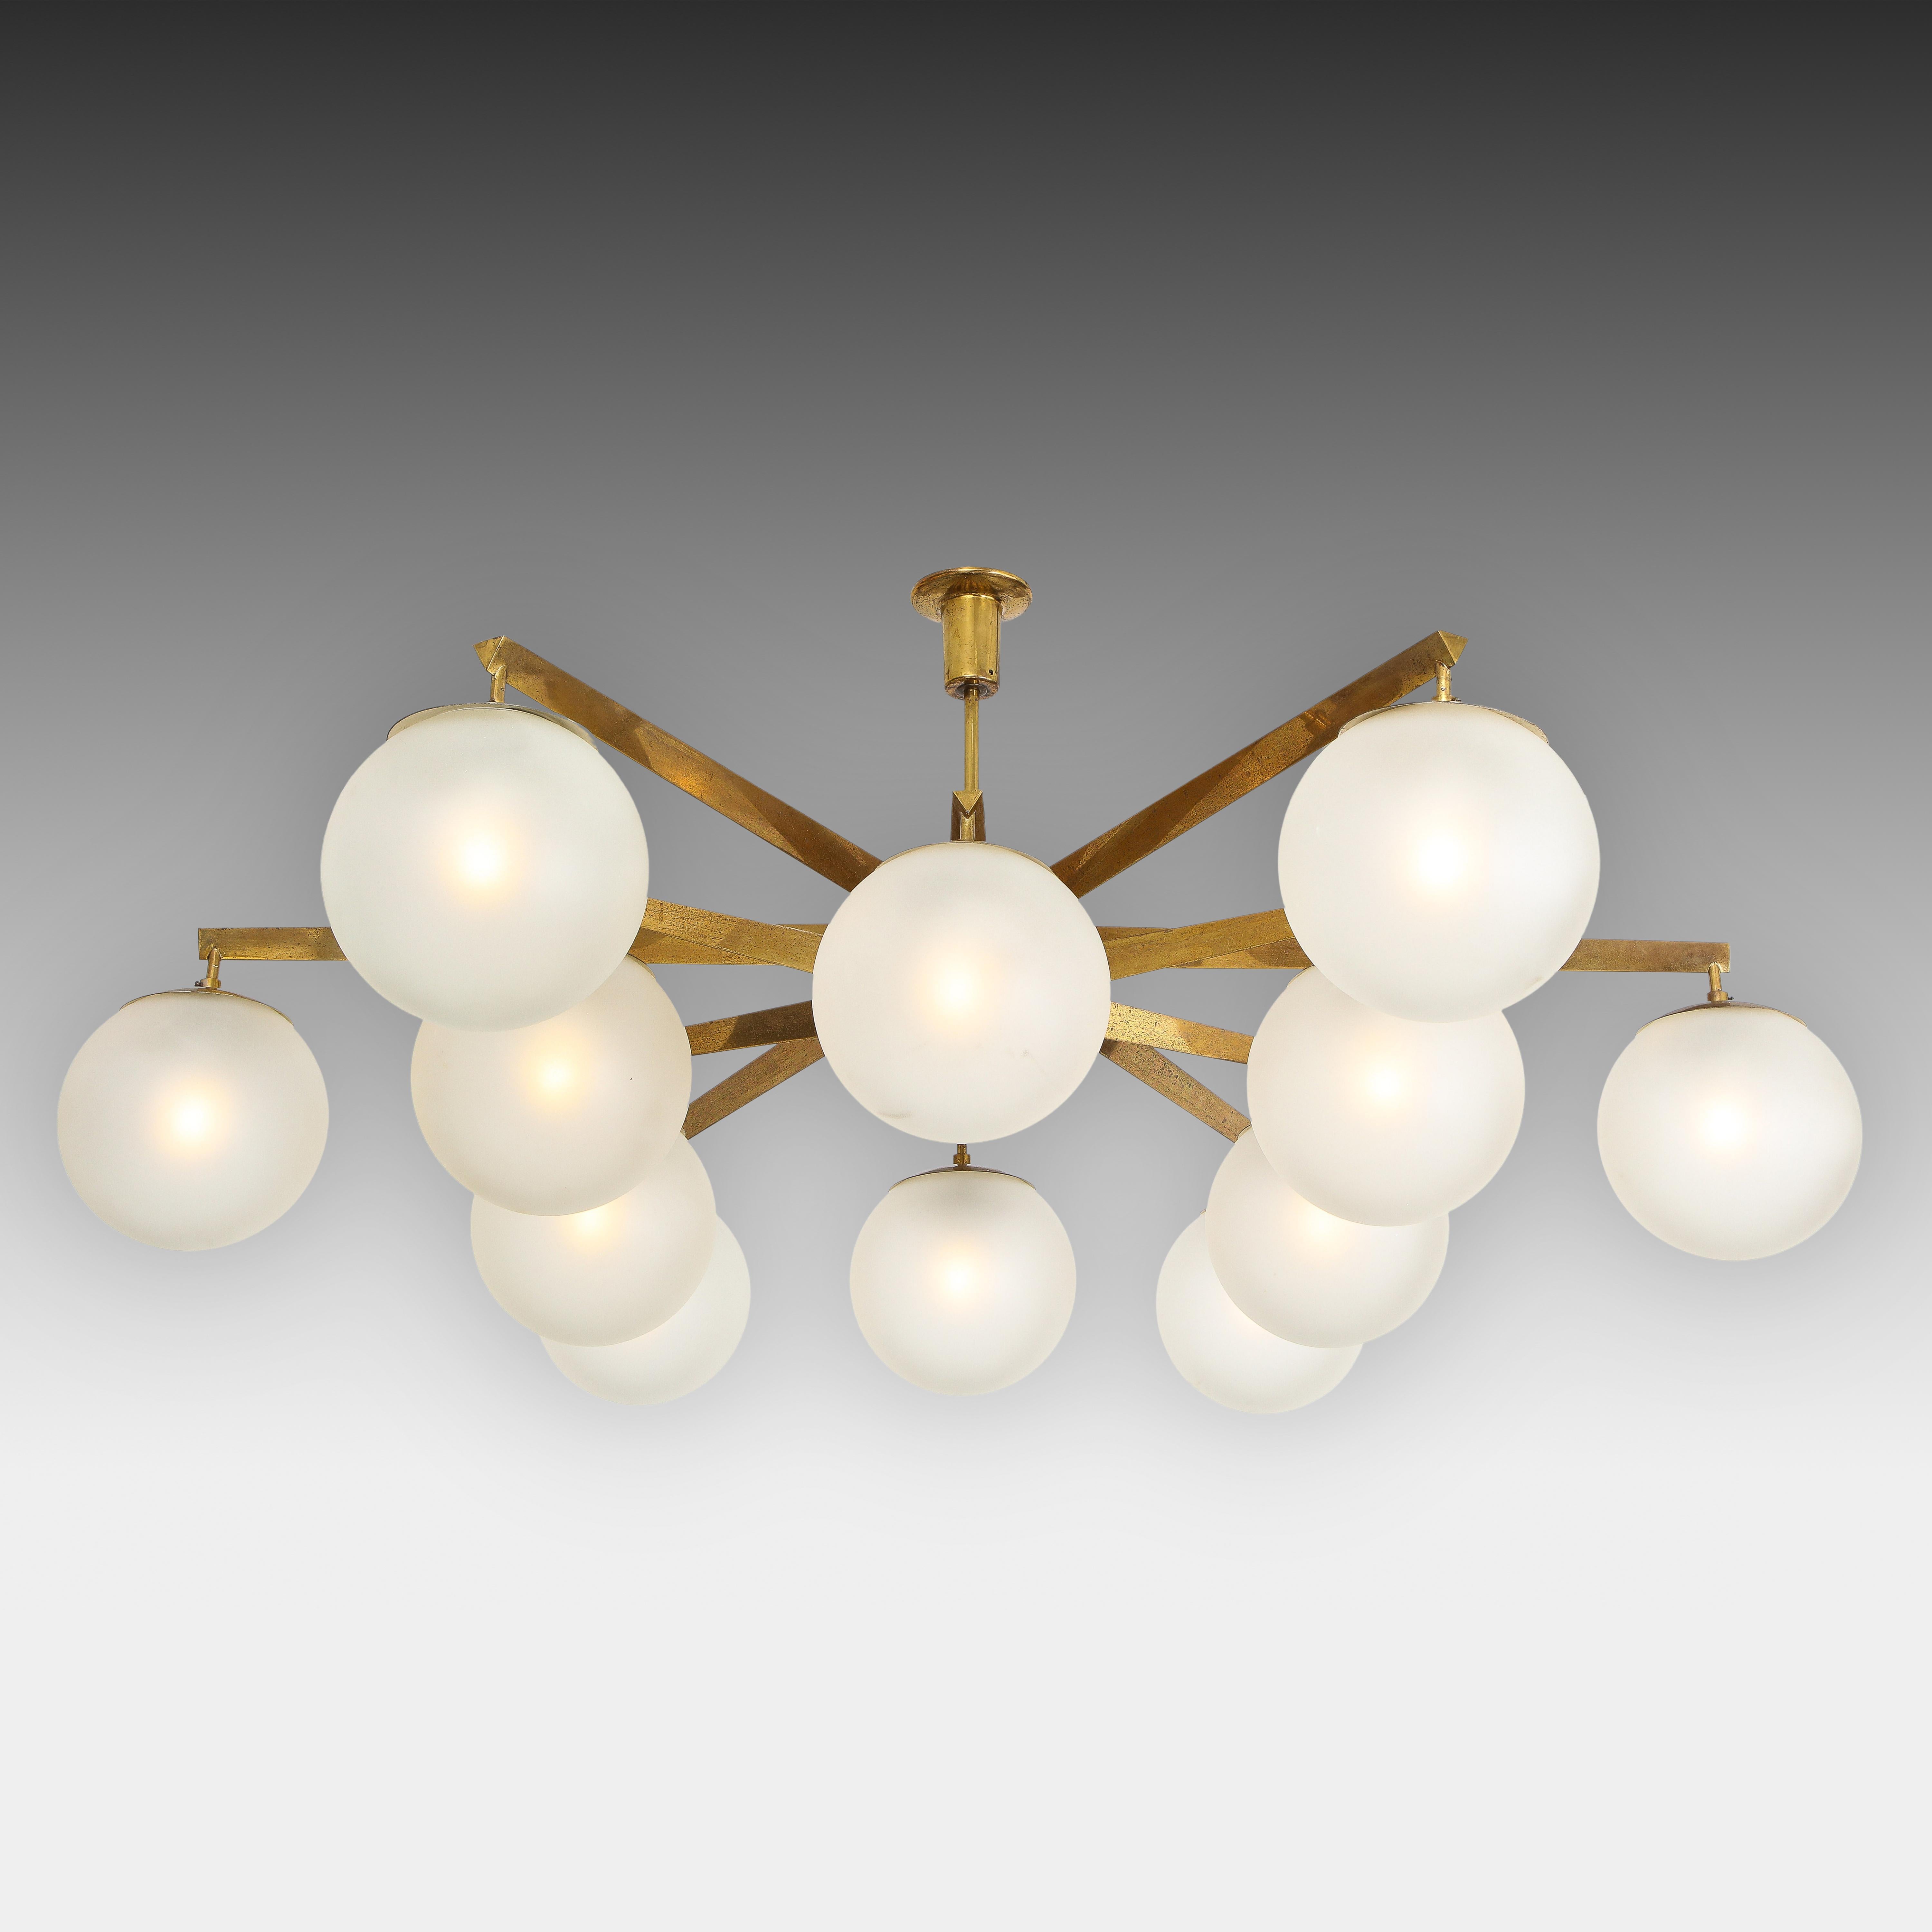 Angelo Lelli for Arredoluce rare spectacular original 'Stella a 12' chandelier or ceiling light with twelve acid-etched glass globe shades suspended from brass structure in a starburst shape and mount, Italy, circa 1959. Unlike most examples of this